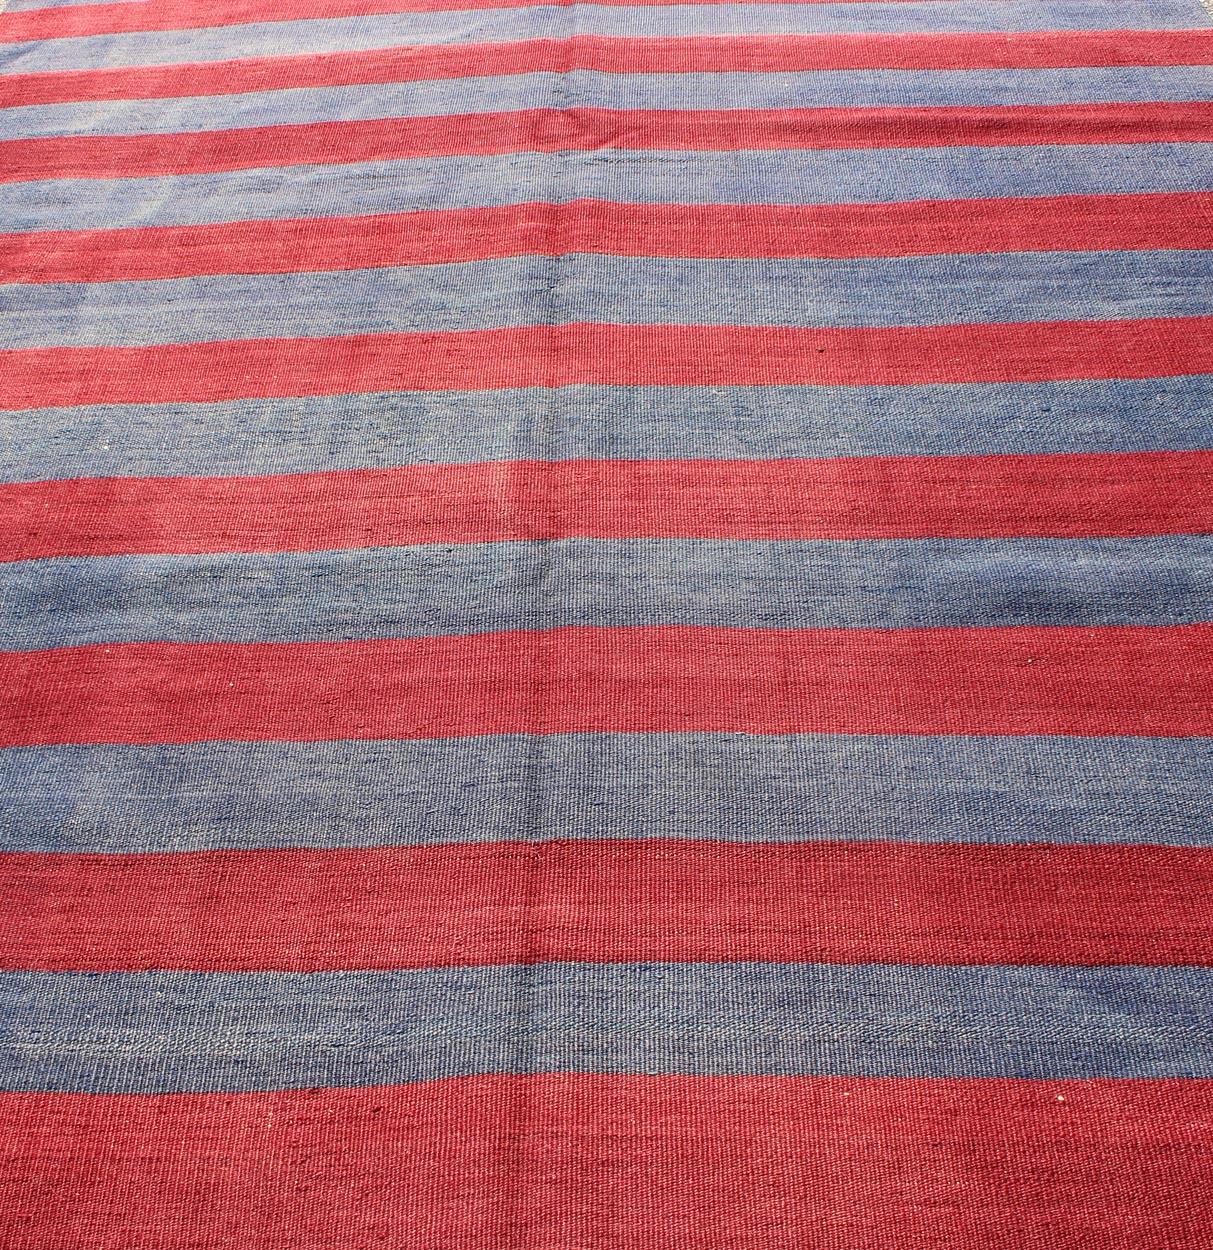 20th Century Vintage Striped Turkish Kilim with Casual Modern Design in Red and Blue For Sale